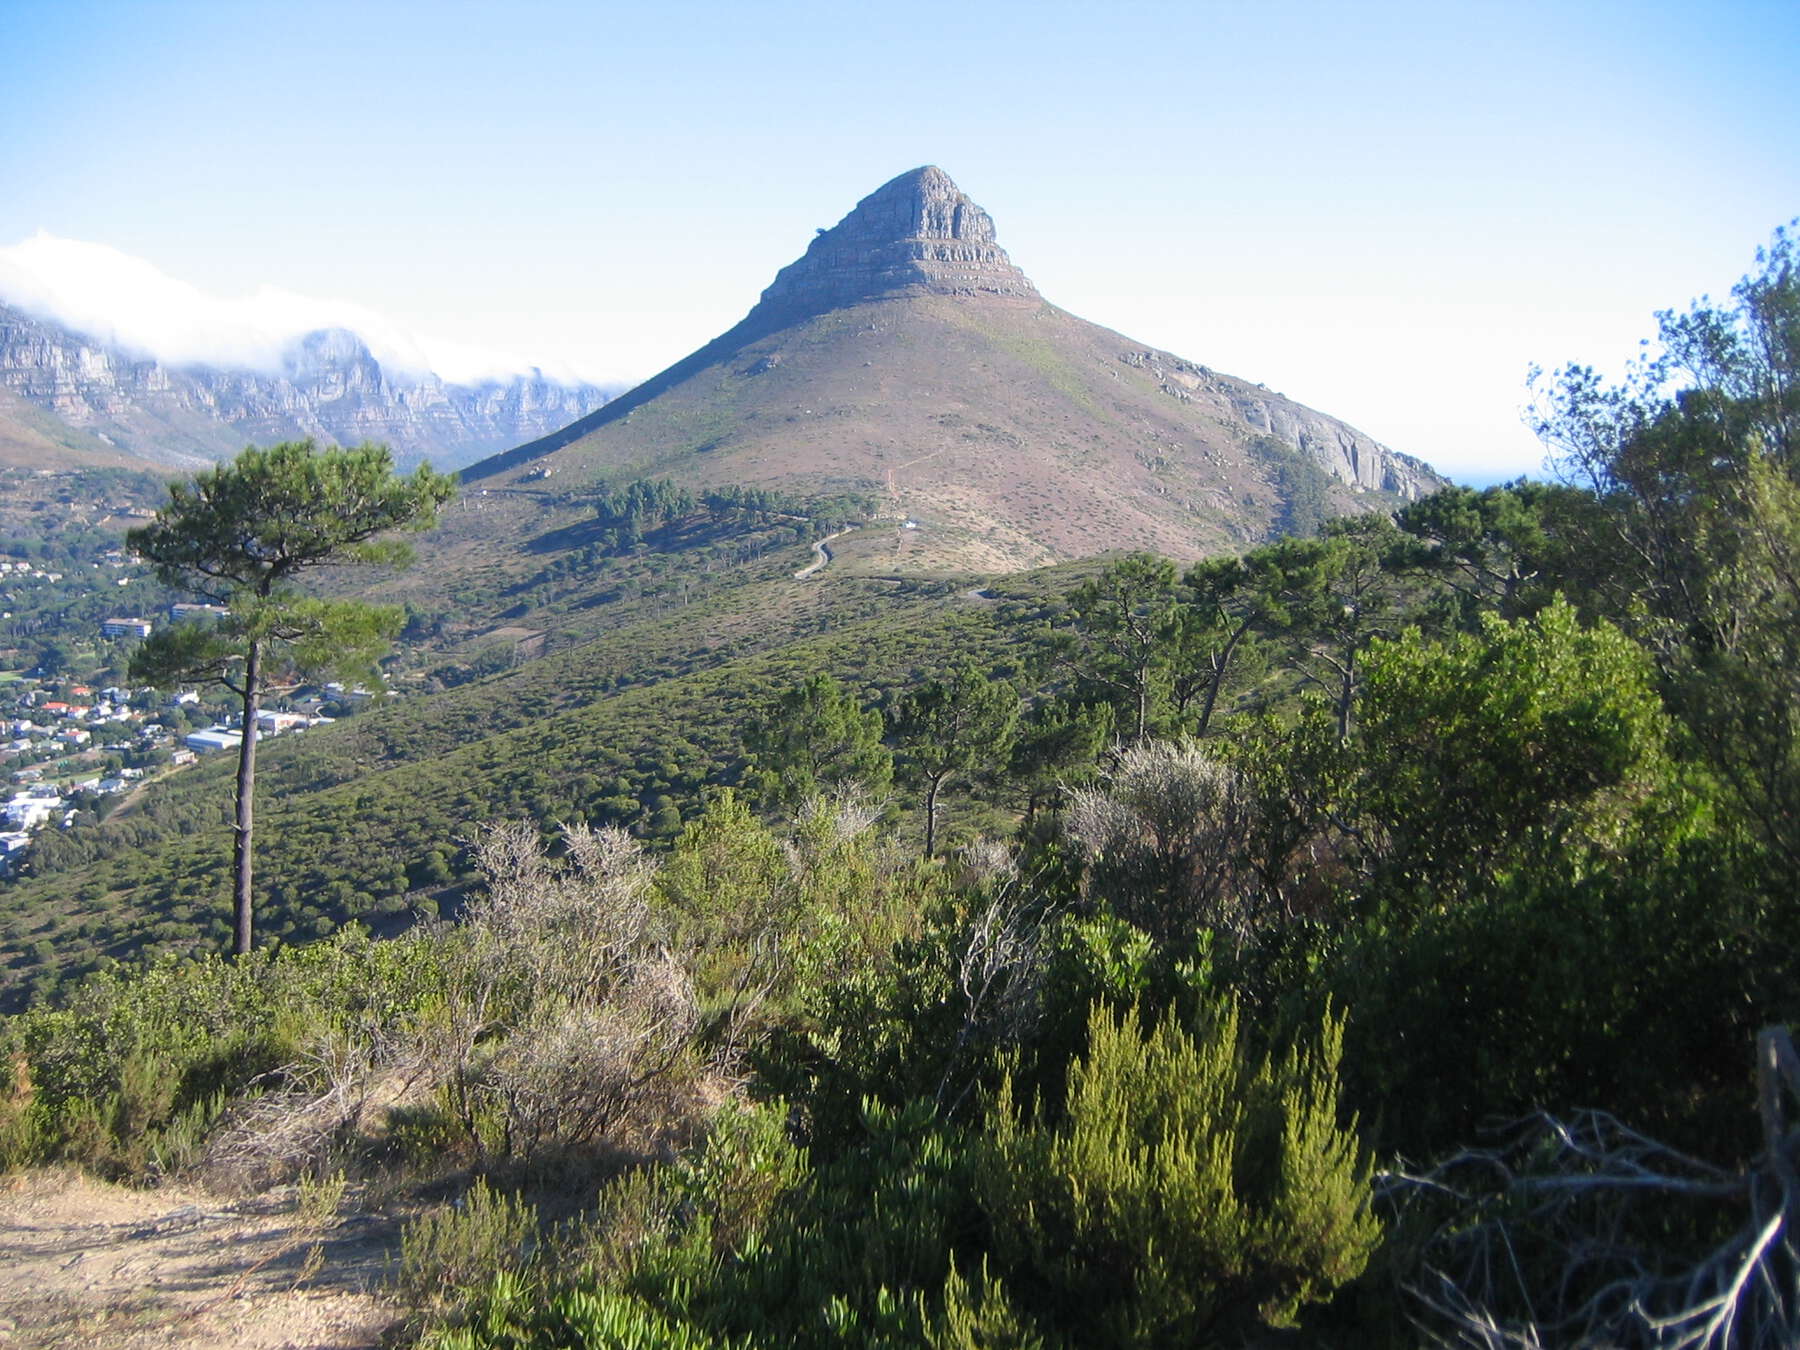 View from top of a hill filled with shrubs and, in the back, is a large stone conical peak.